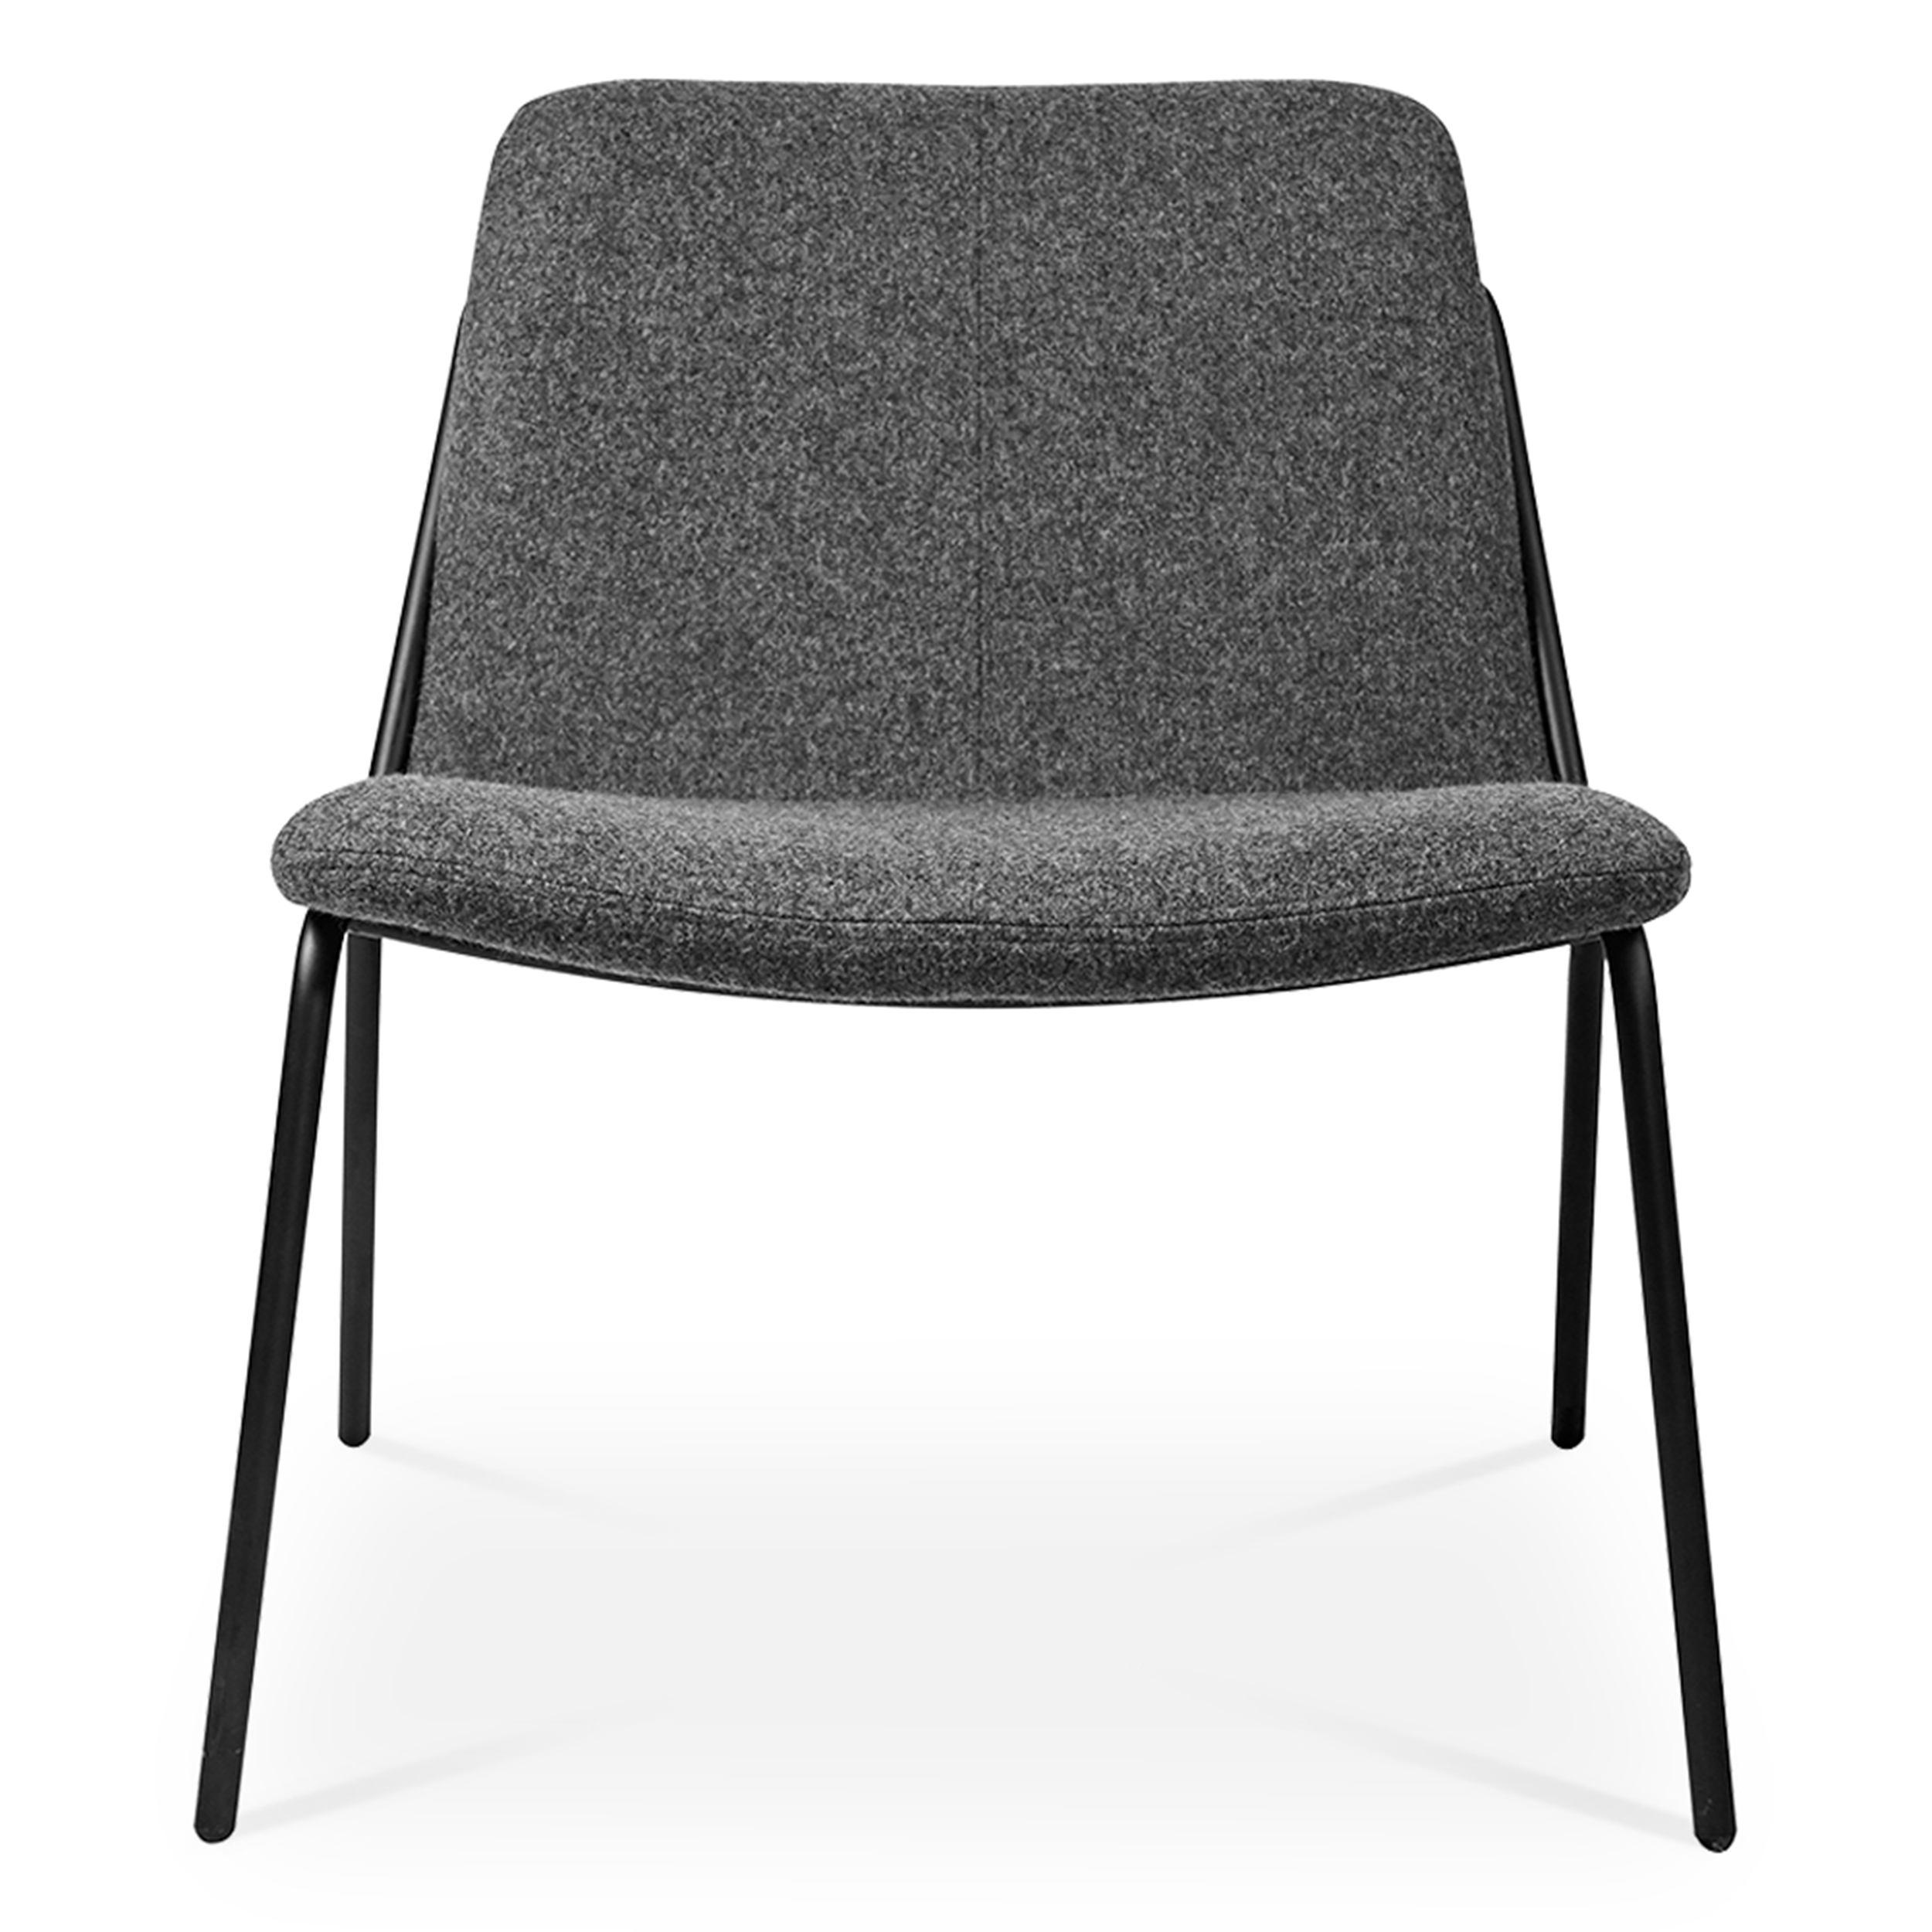 WS - Sling lounge chair - Upholstered dark grey (Front)